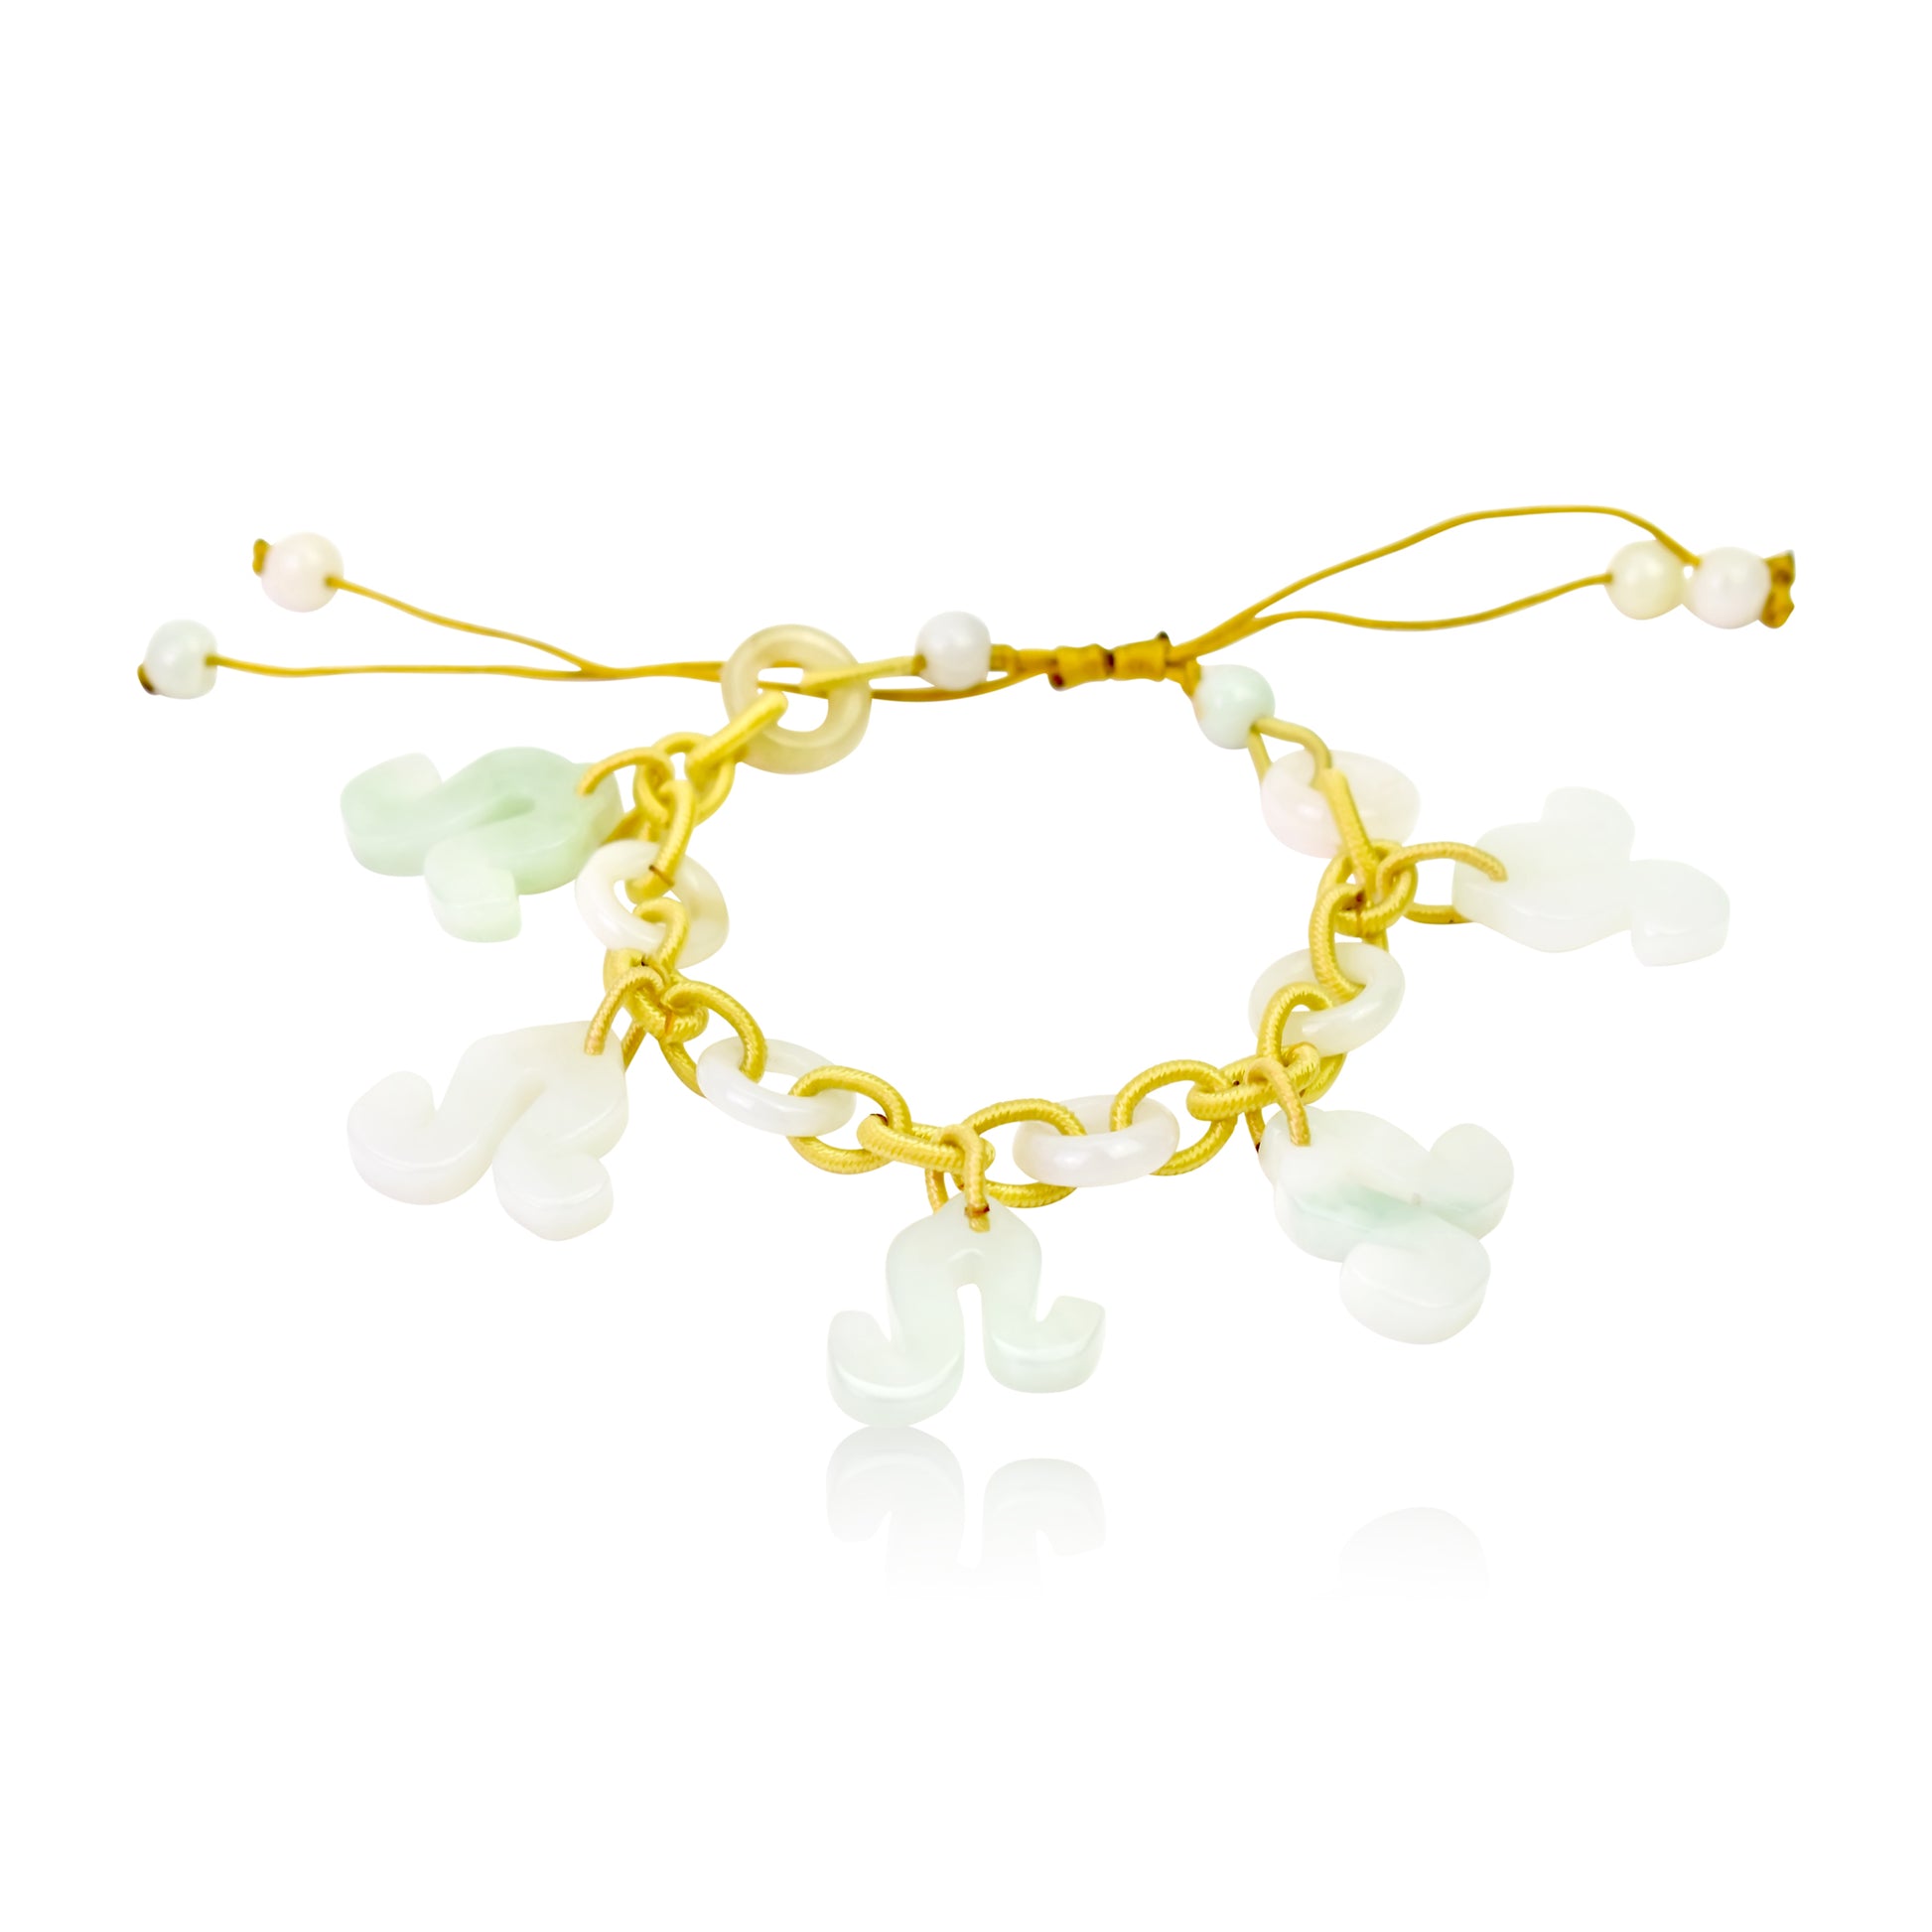 Wear the Force of the Lion on Your Wrist with Our Leo Jade Bracelet made with Yellow Cord